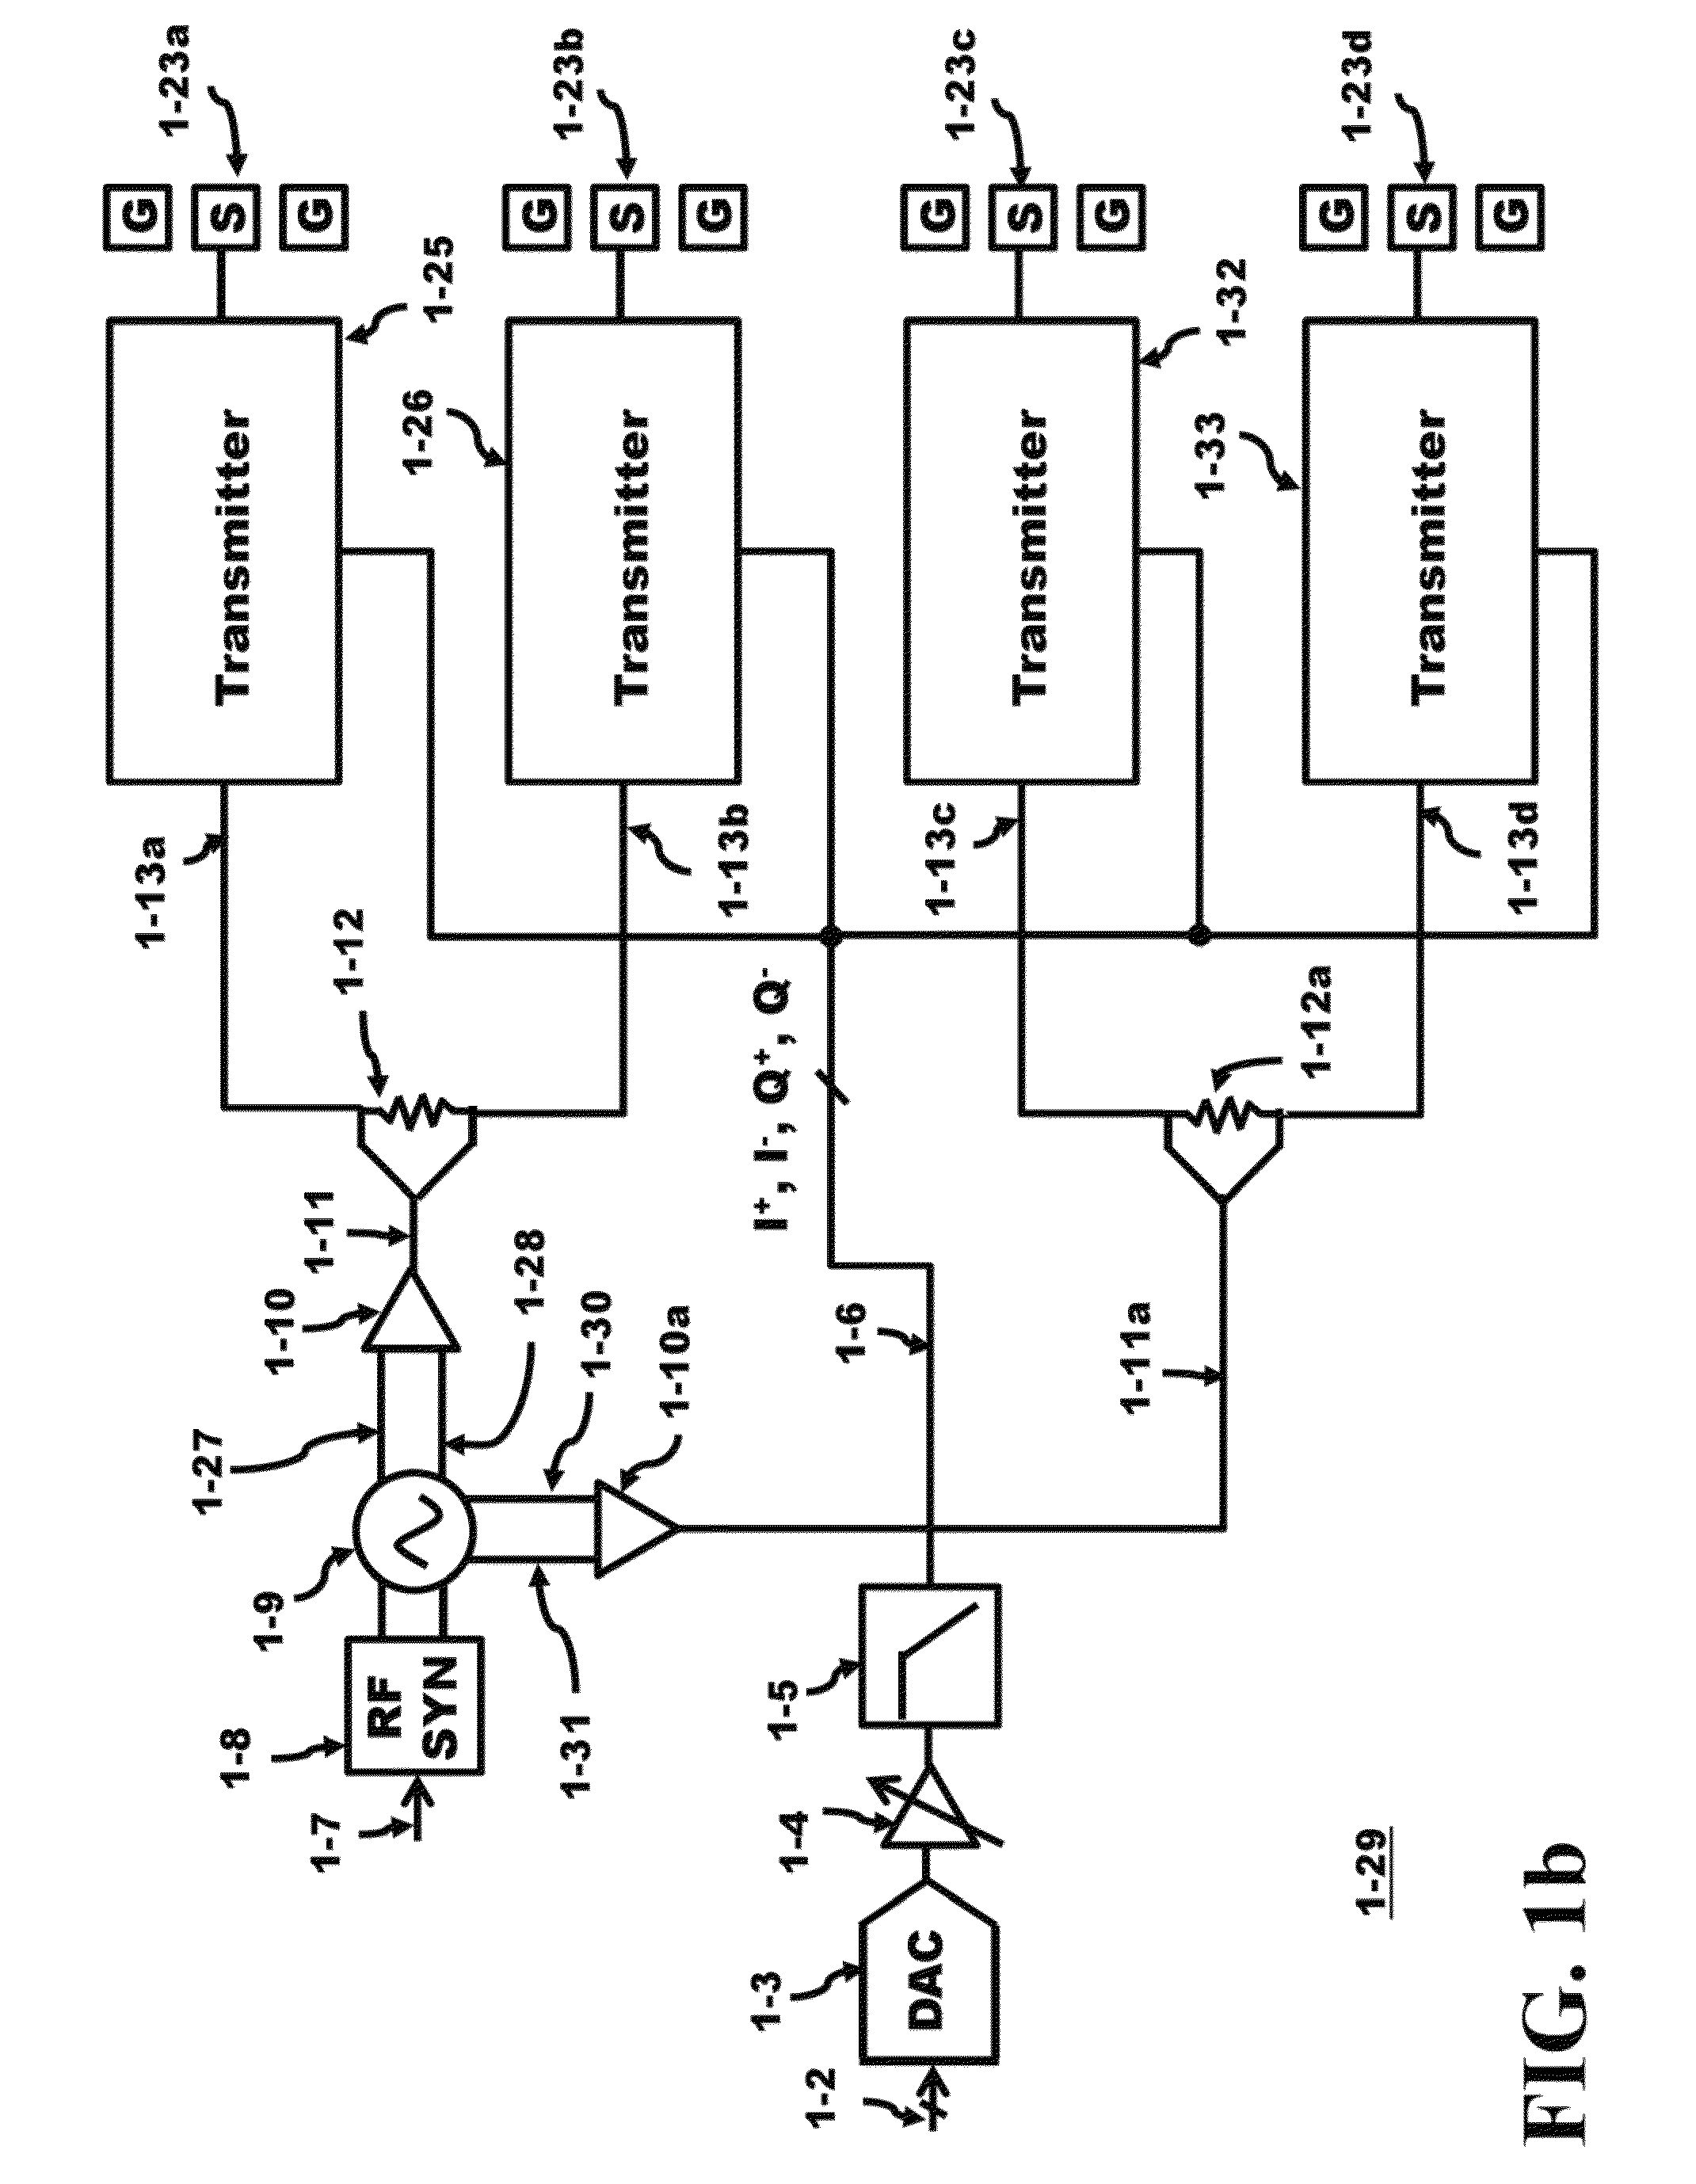 Method and apparatus for a class-E load tuned beamforming 60 GHz transmitter